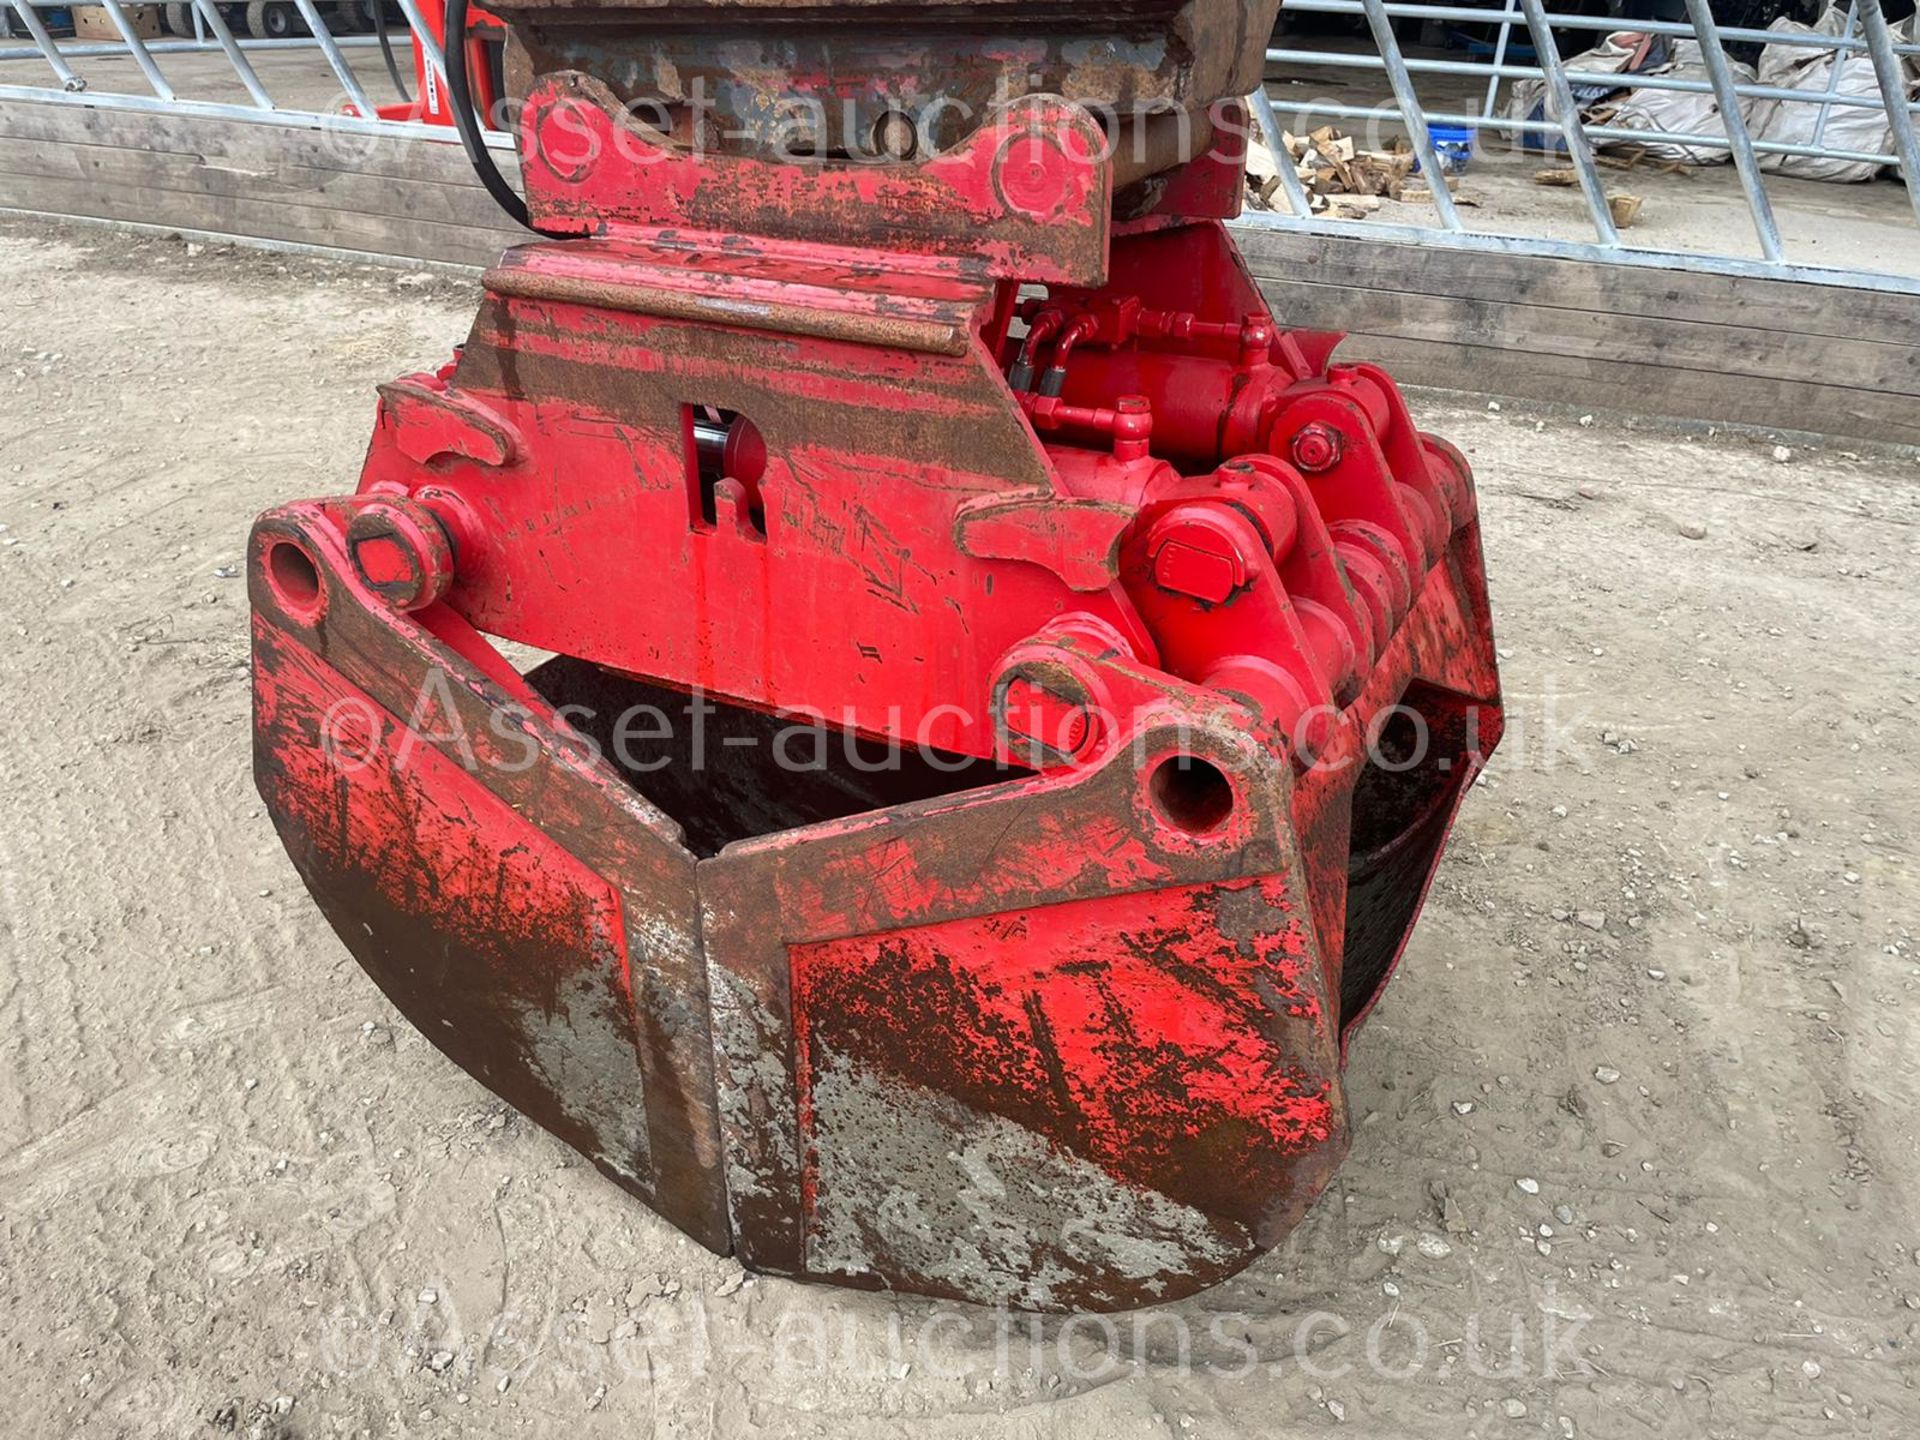 HYDRAULIC RED SHELL GRAB, SUITABLE FOR A LARGE EXCAVATOR, HYDRAULIC DRIVEN, 65mm PINS *PLUS VAT* - Image 3 of 16